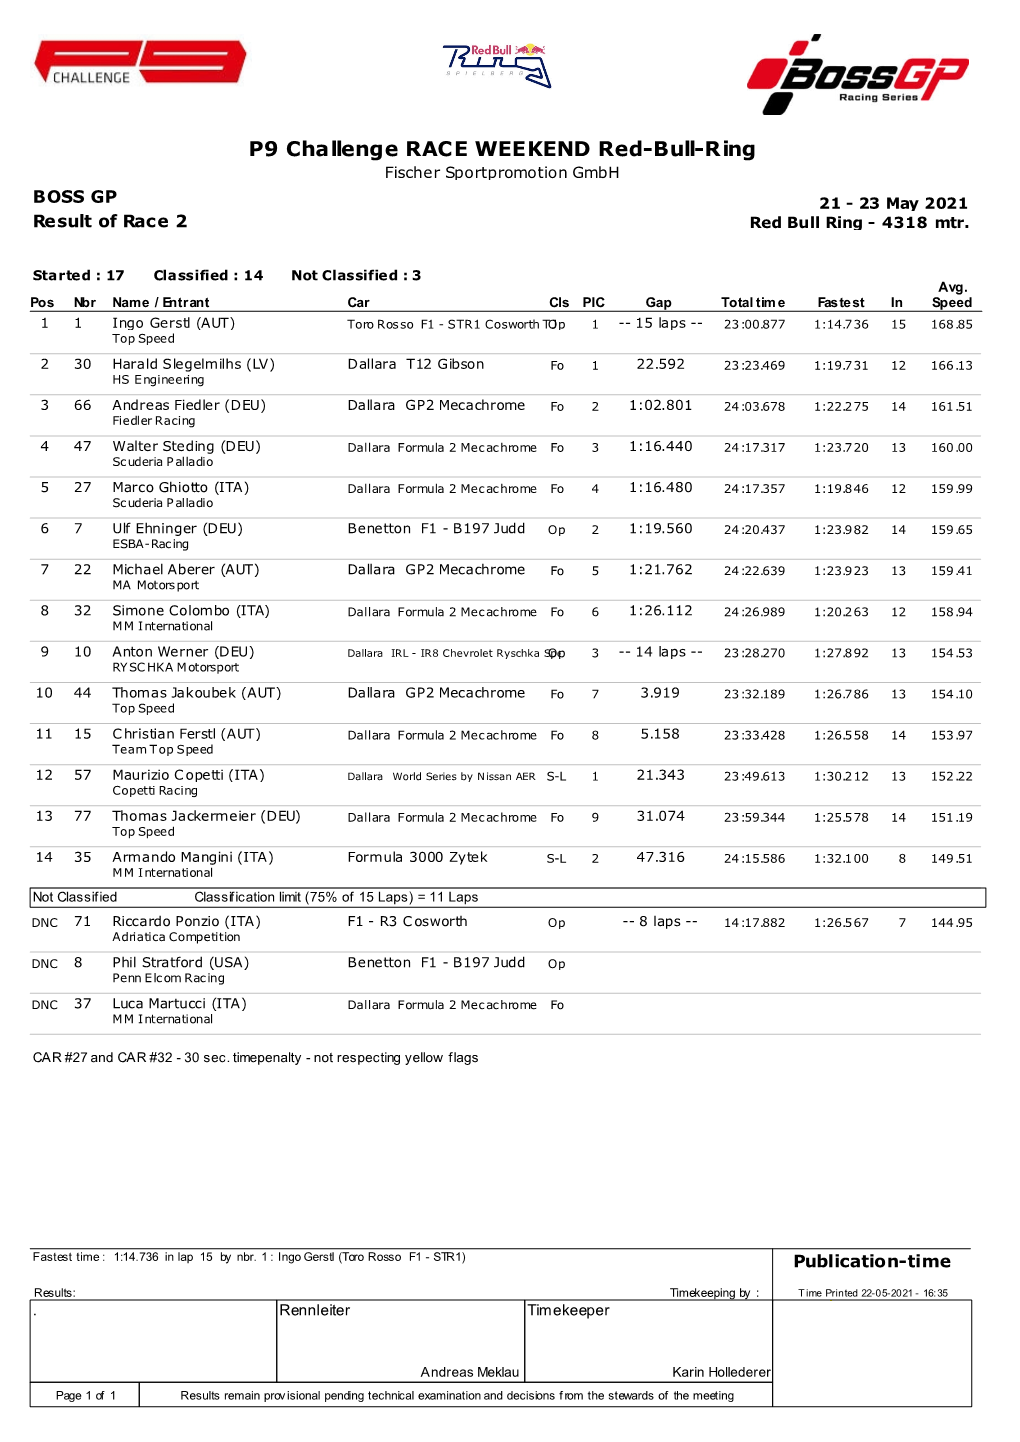 P9 Challenge RACE WEEKEND Red-Bull-Ring Fischer Sportpromotion Gmbh BOSS GP 21 - 23 May 2021 Result of Race 2 Red Bull Ring - 4318 Mtr